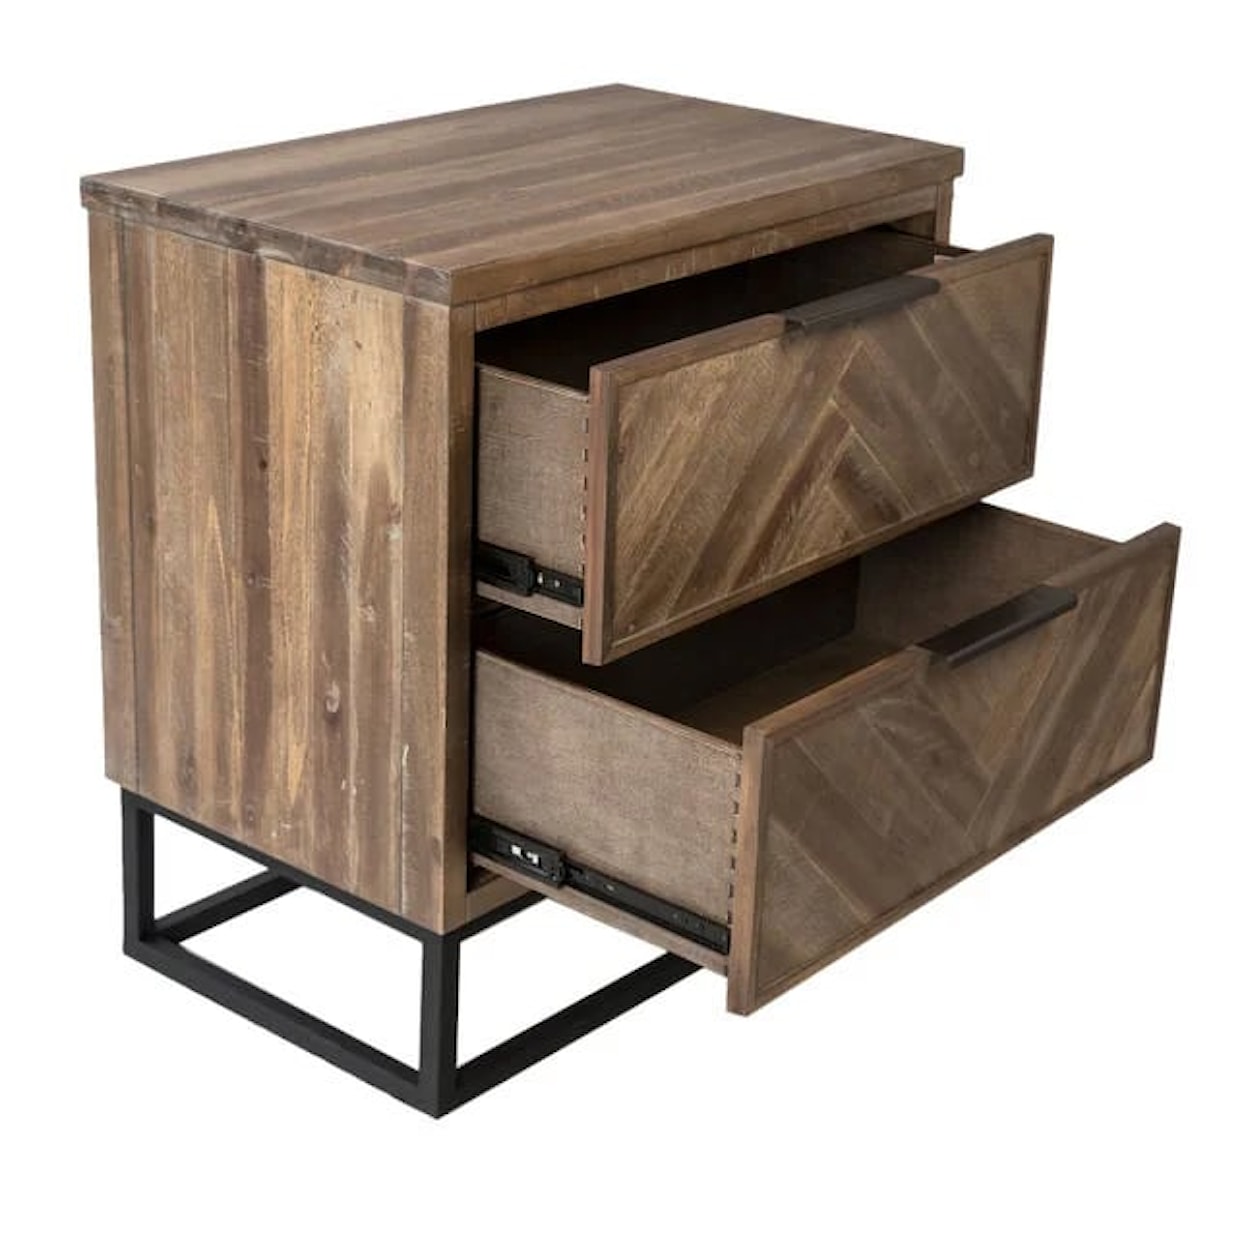 Dovetail Furniture Holbrook Holbrook Nightstand by Dovetail